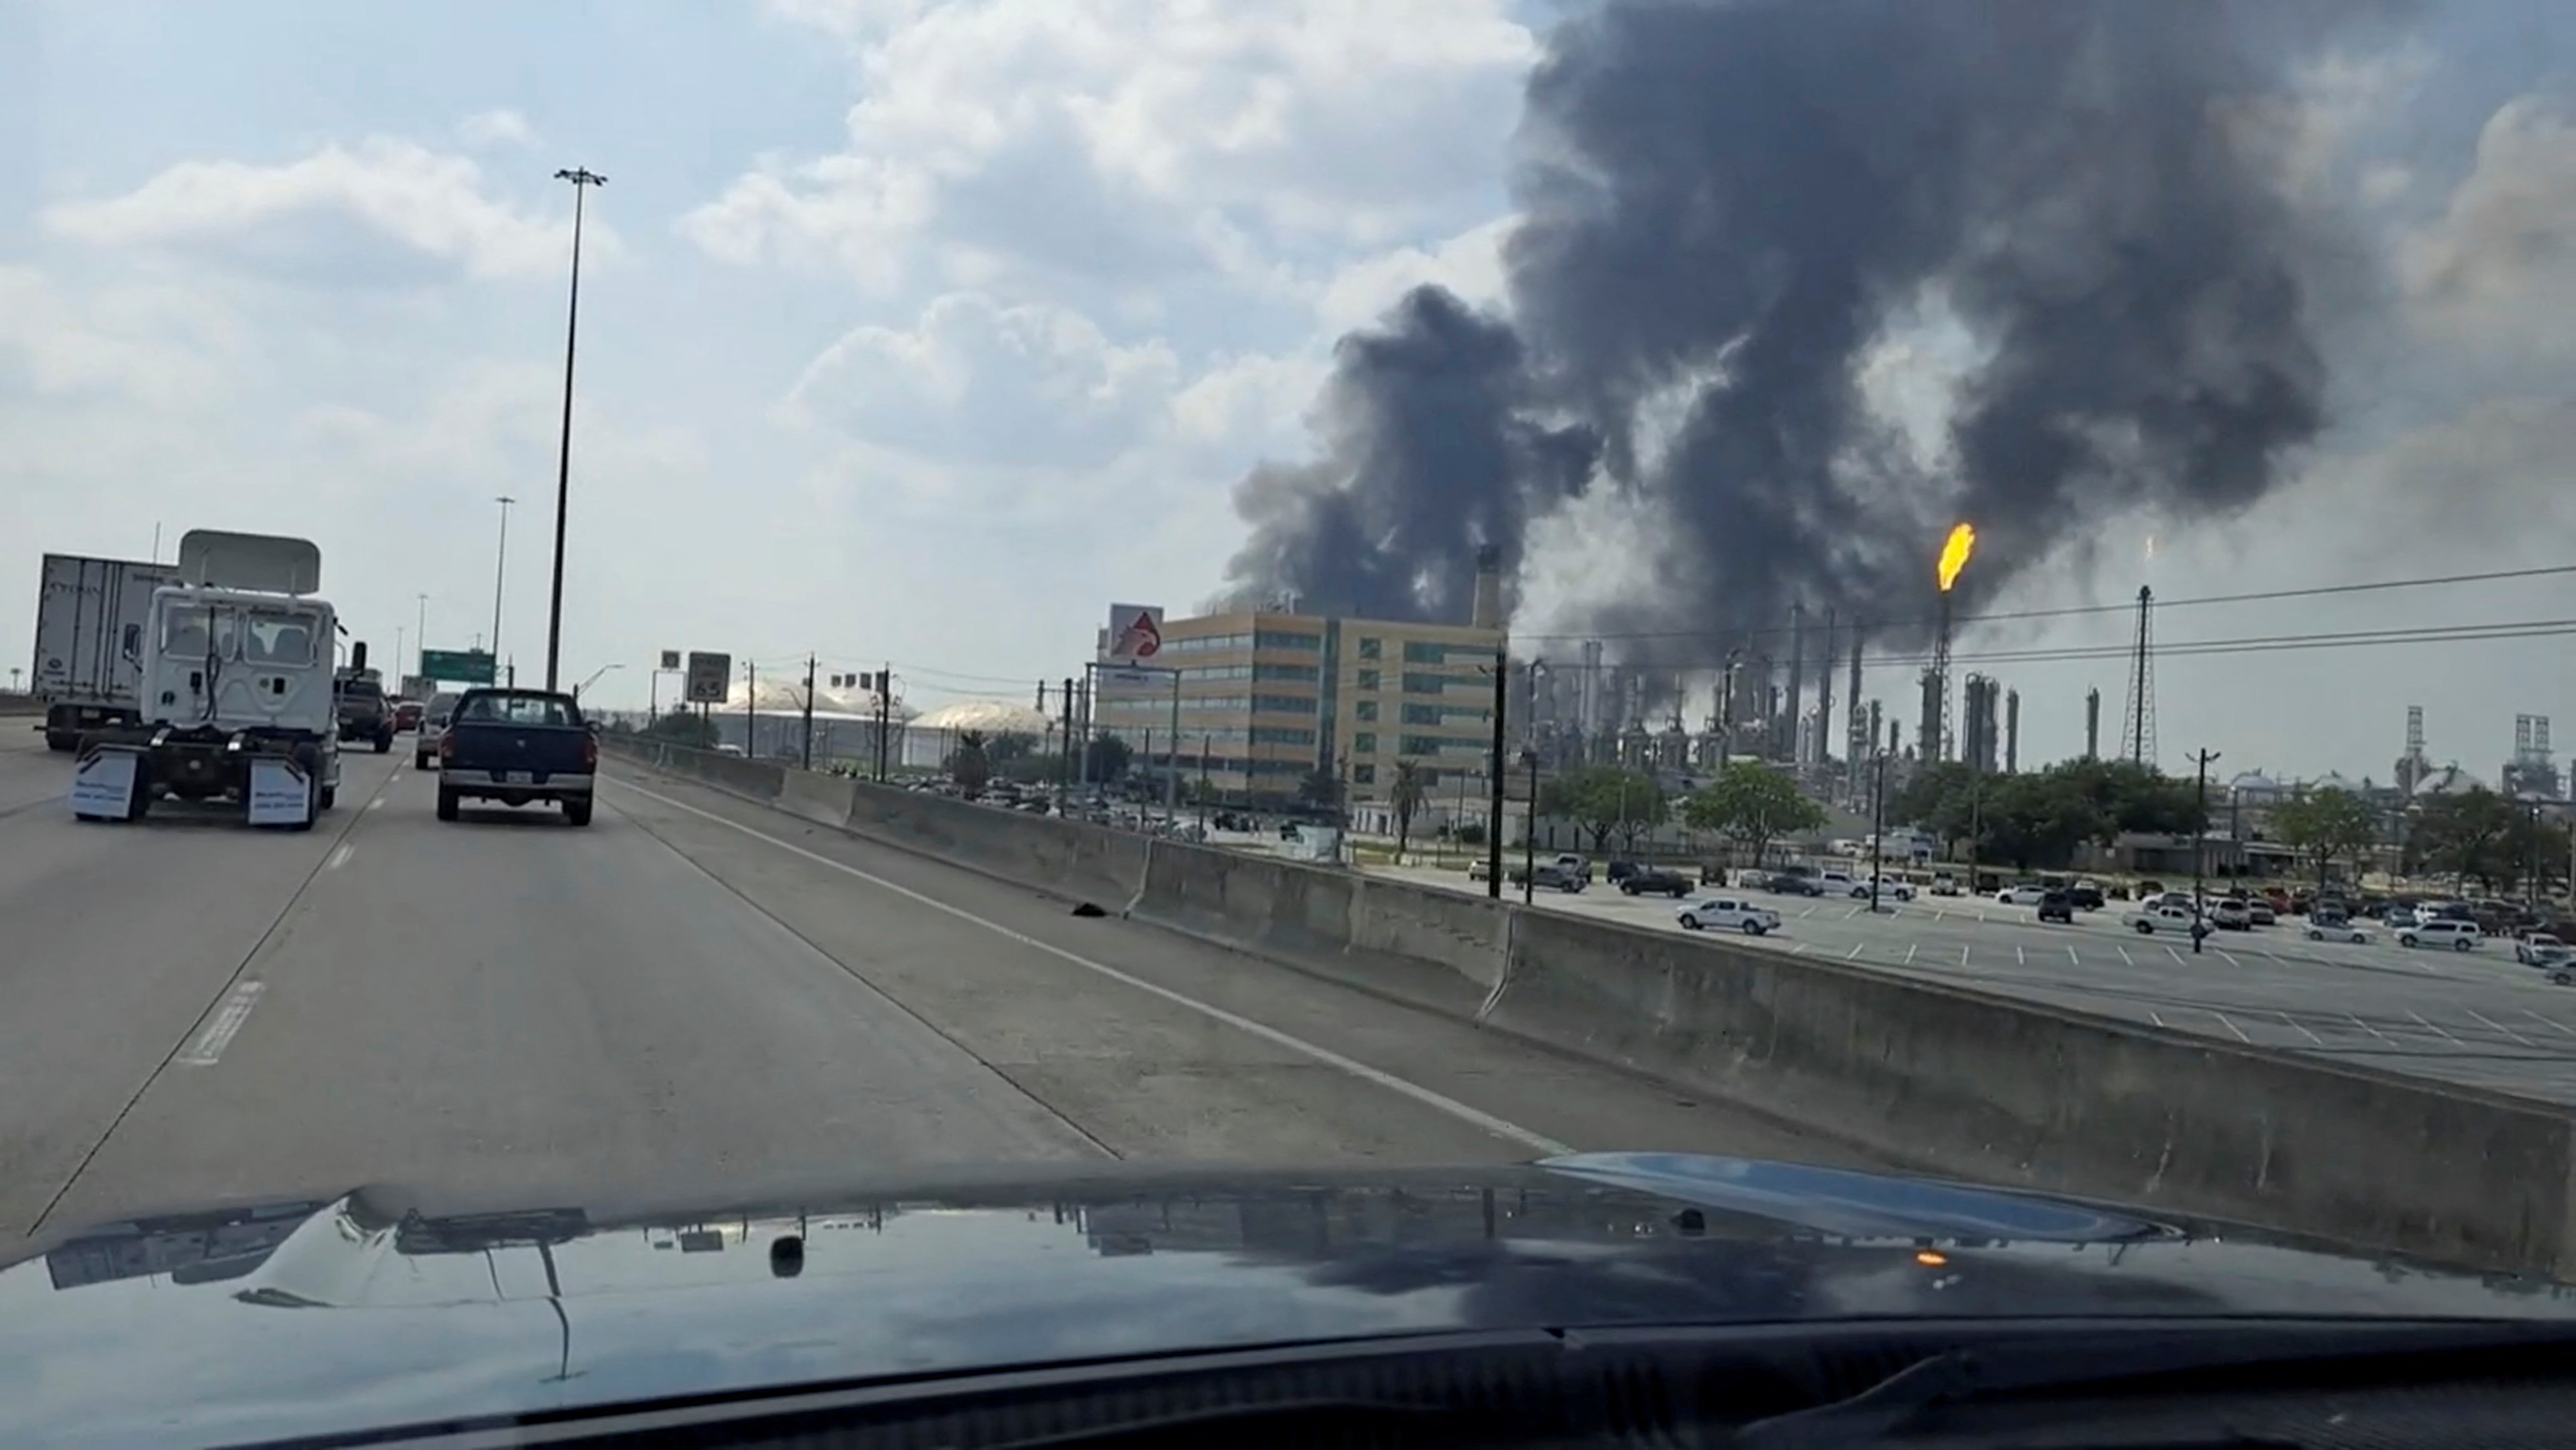 Fire at an olefins unit at Shell Deer Park, Texas chemical plant